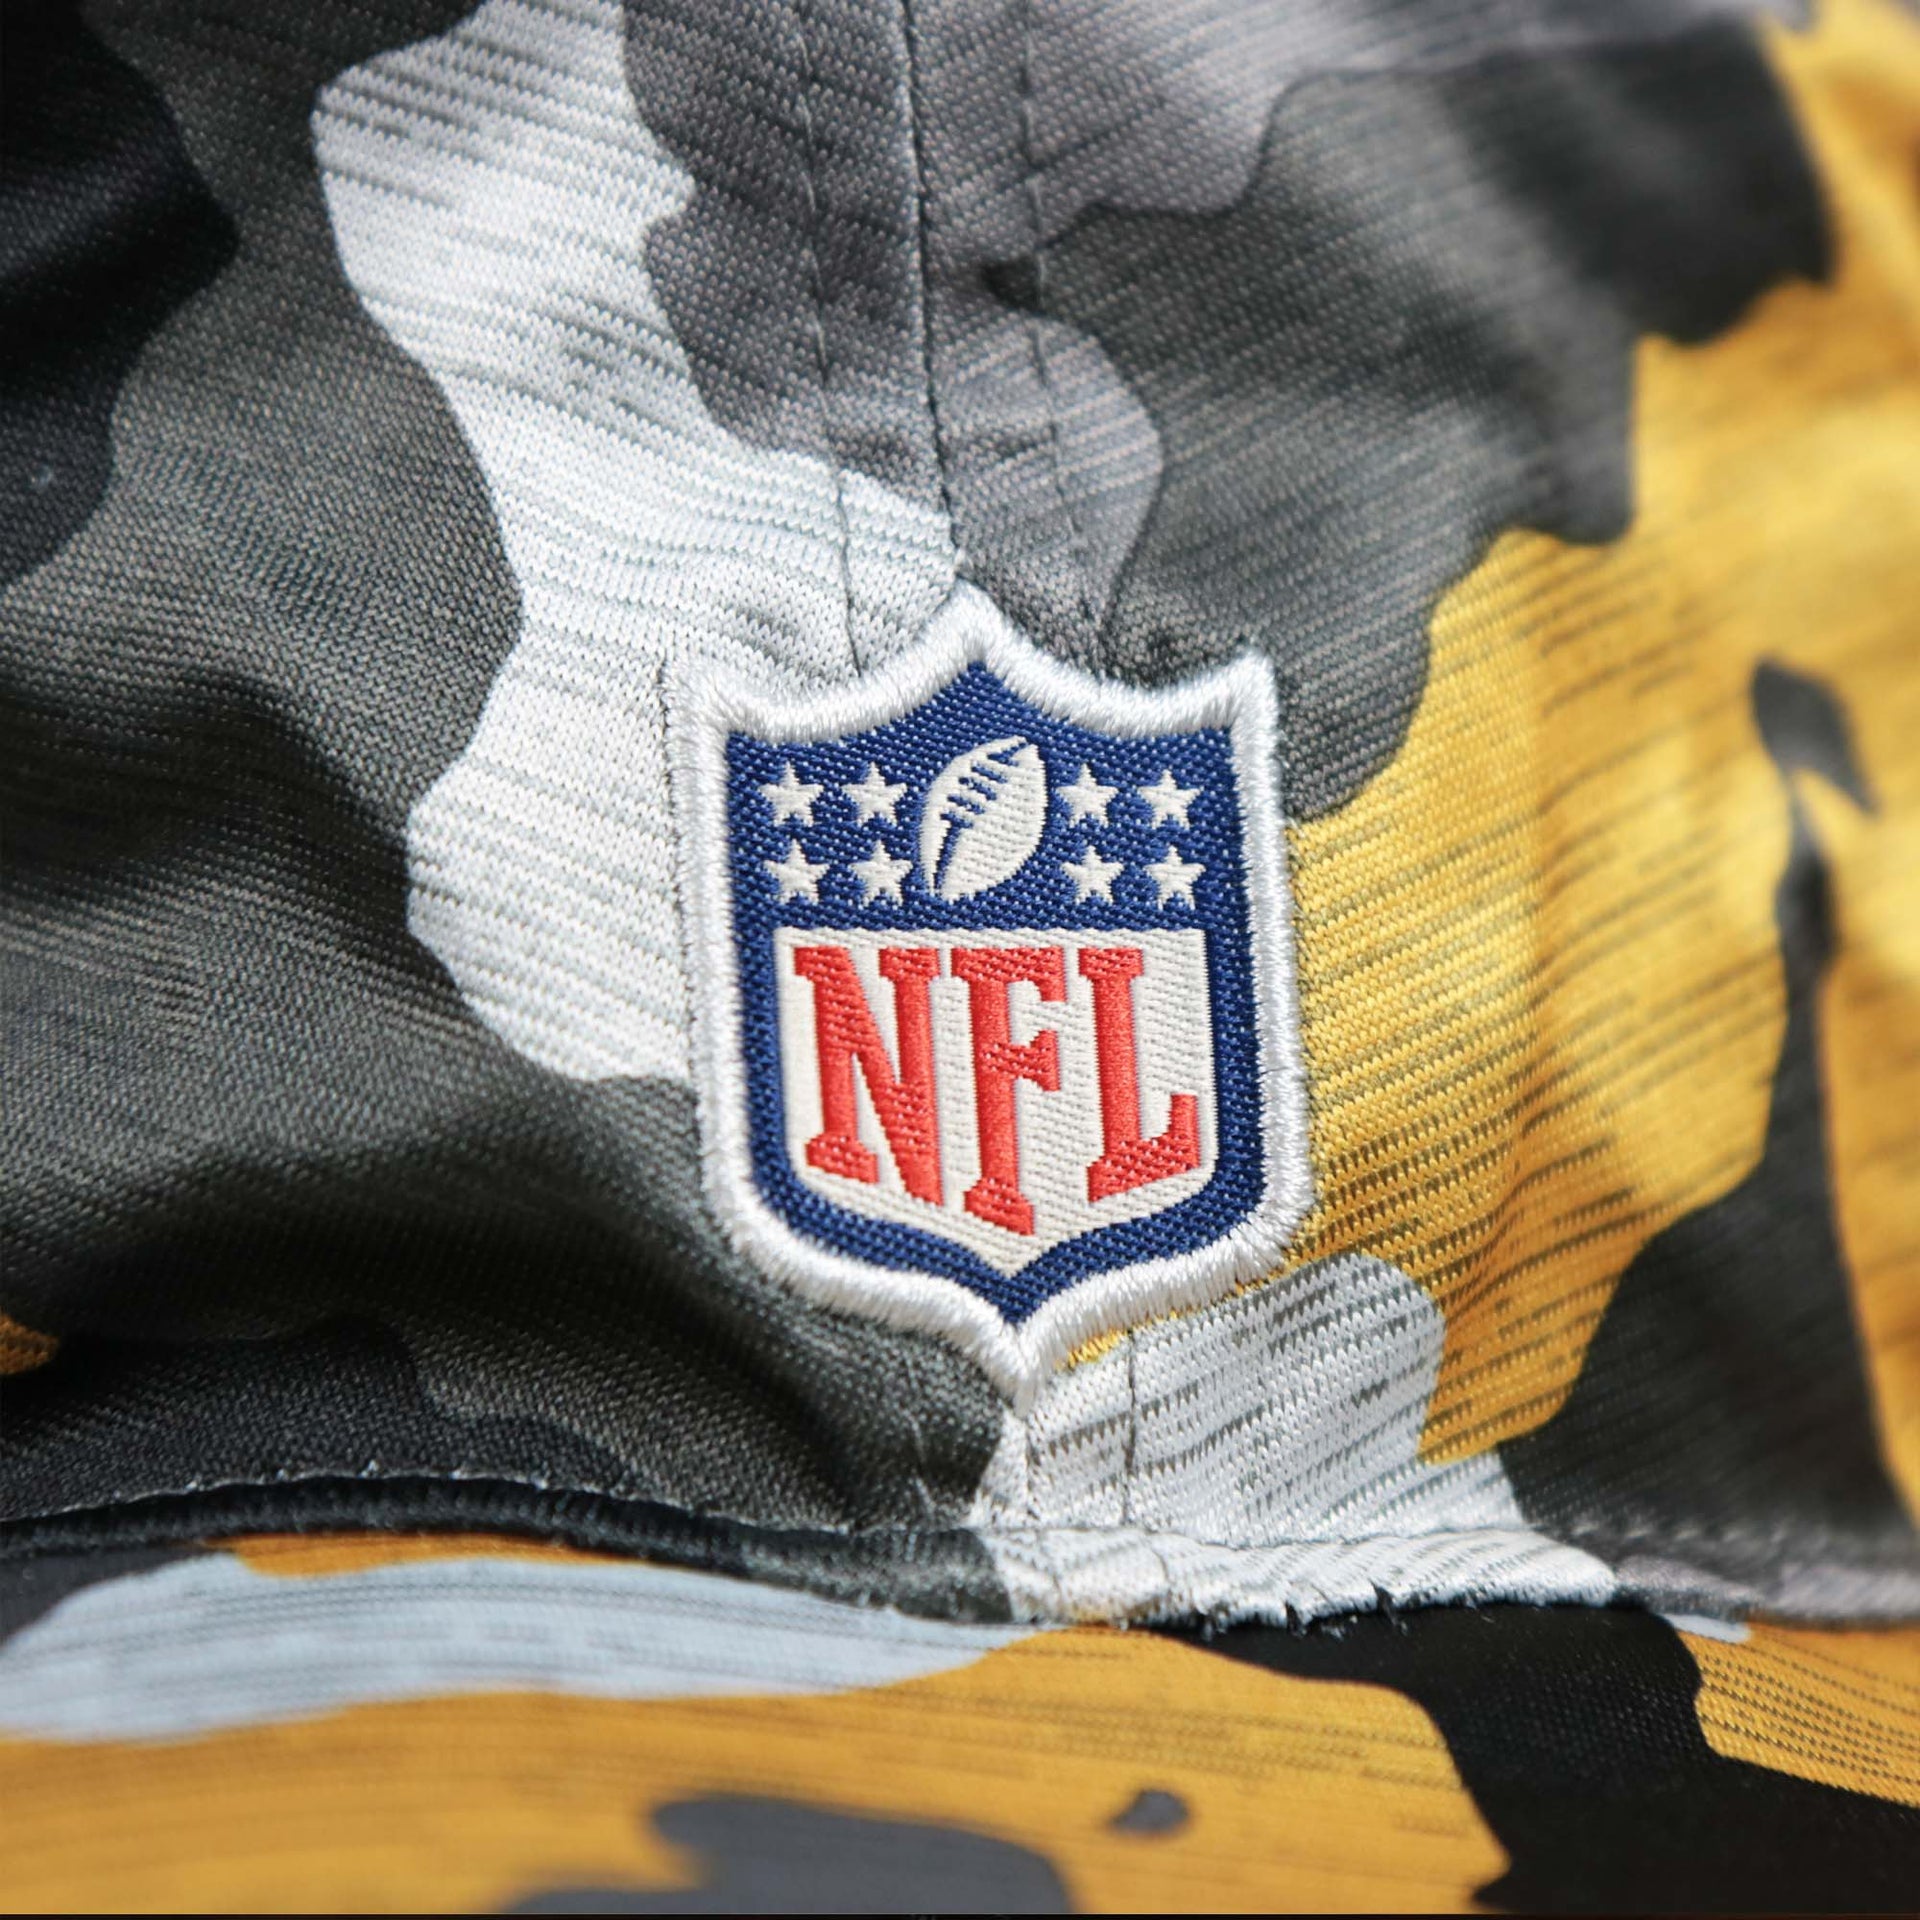 The NFl Logo on the Pittsburgh Steelers NFL Summer Training Camp 2022 Camo Bucket Hat | Yellow Bucket Hat